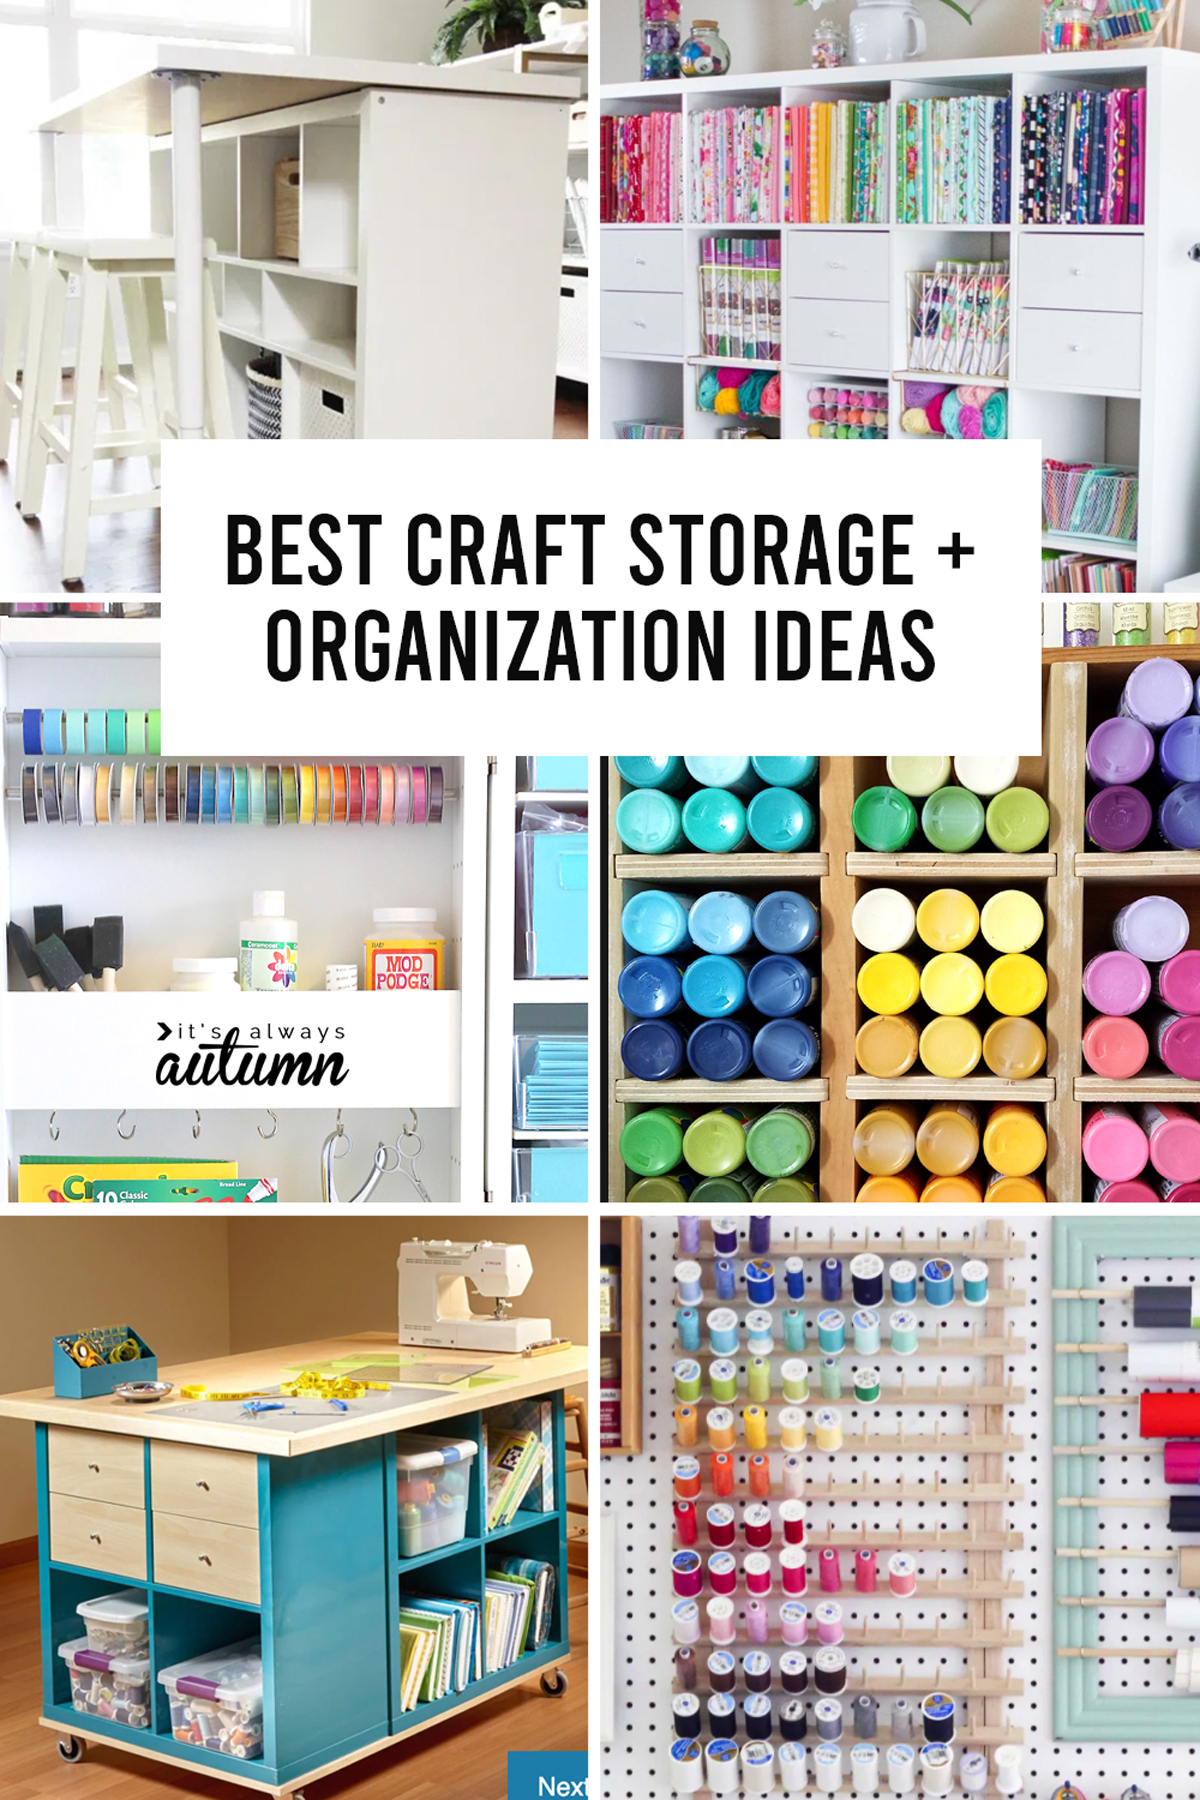 Best Craft Room Shelving And Storage Ideas